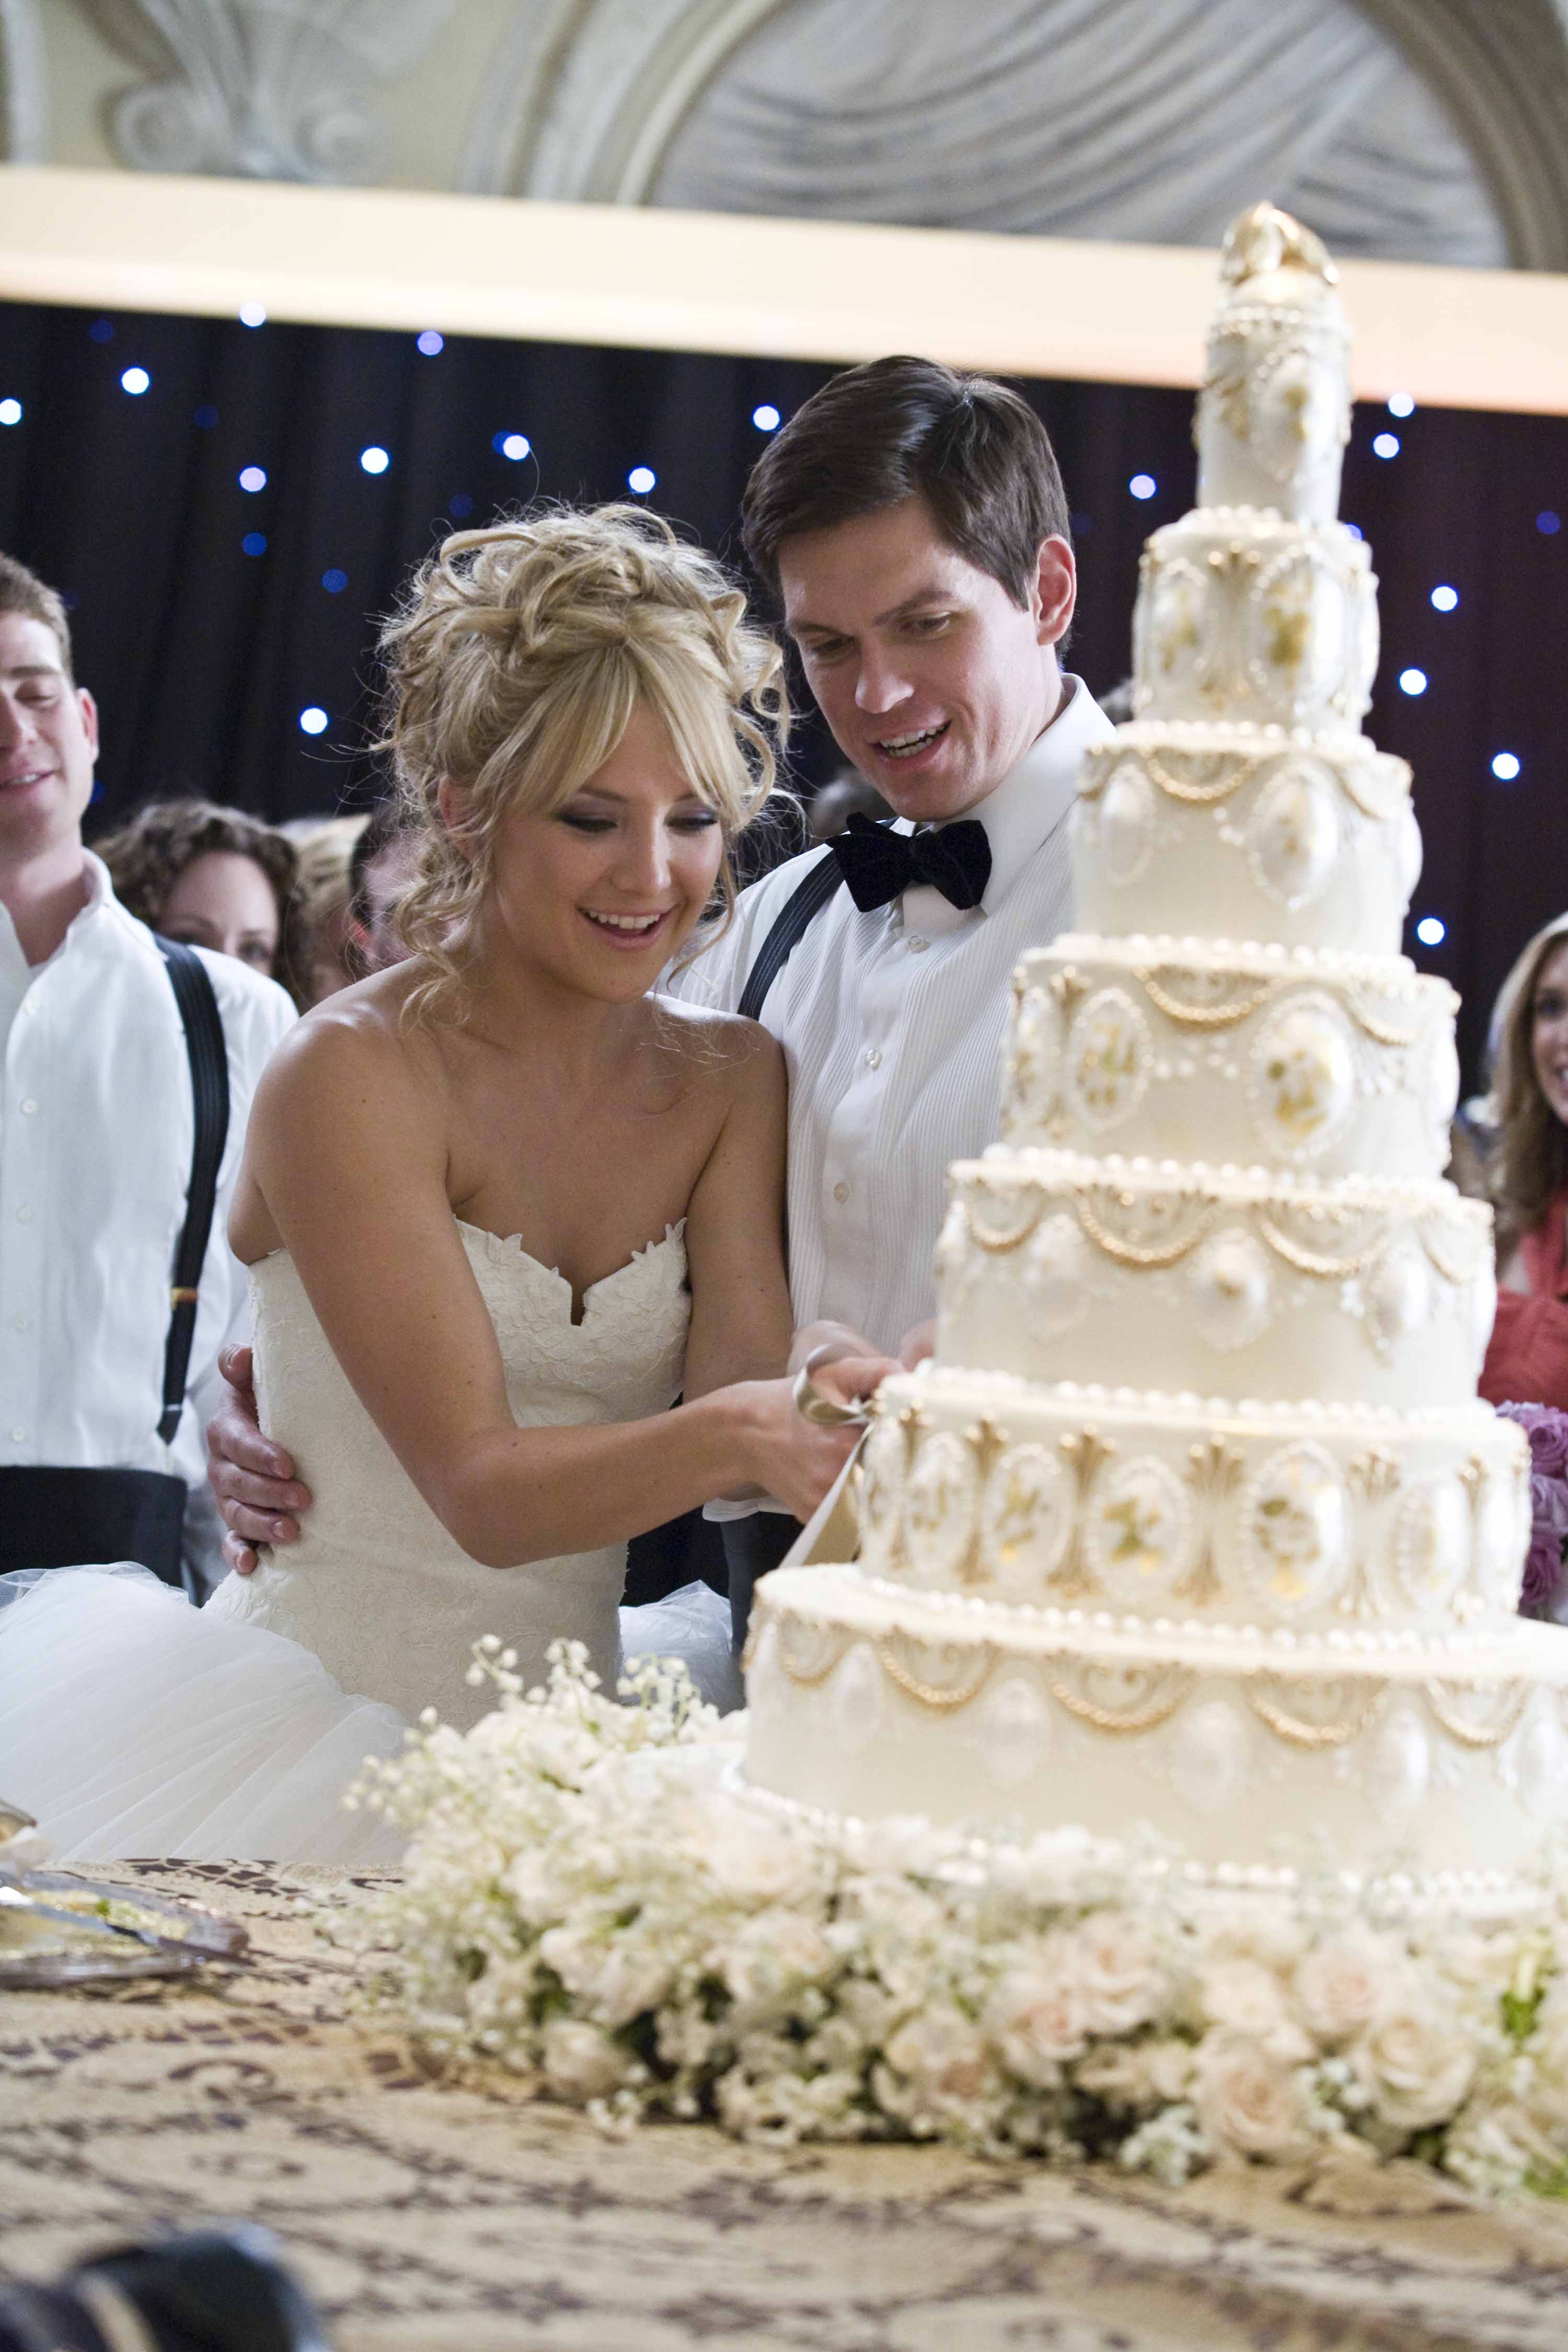 Liv (Kate Hudson) and Liv's groom cutting their "Trendy fusion" cake Bride Wars picture image